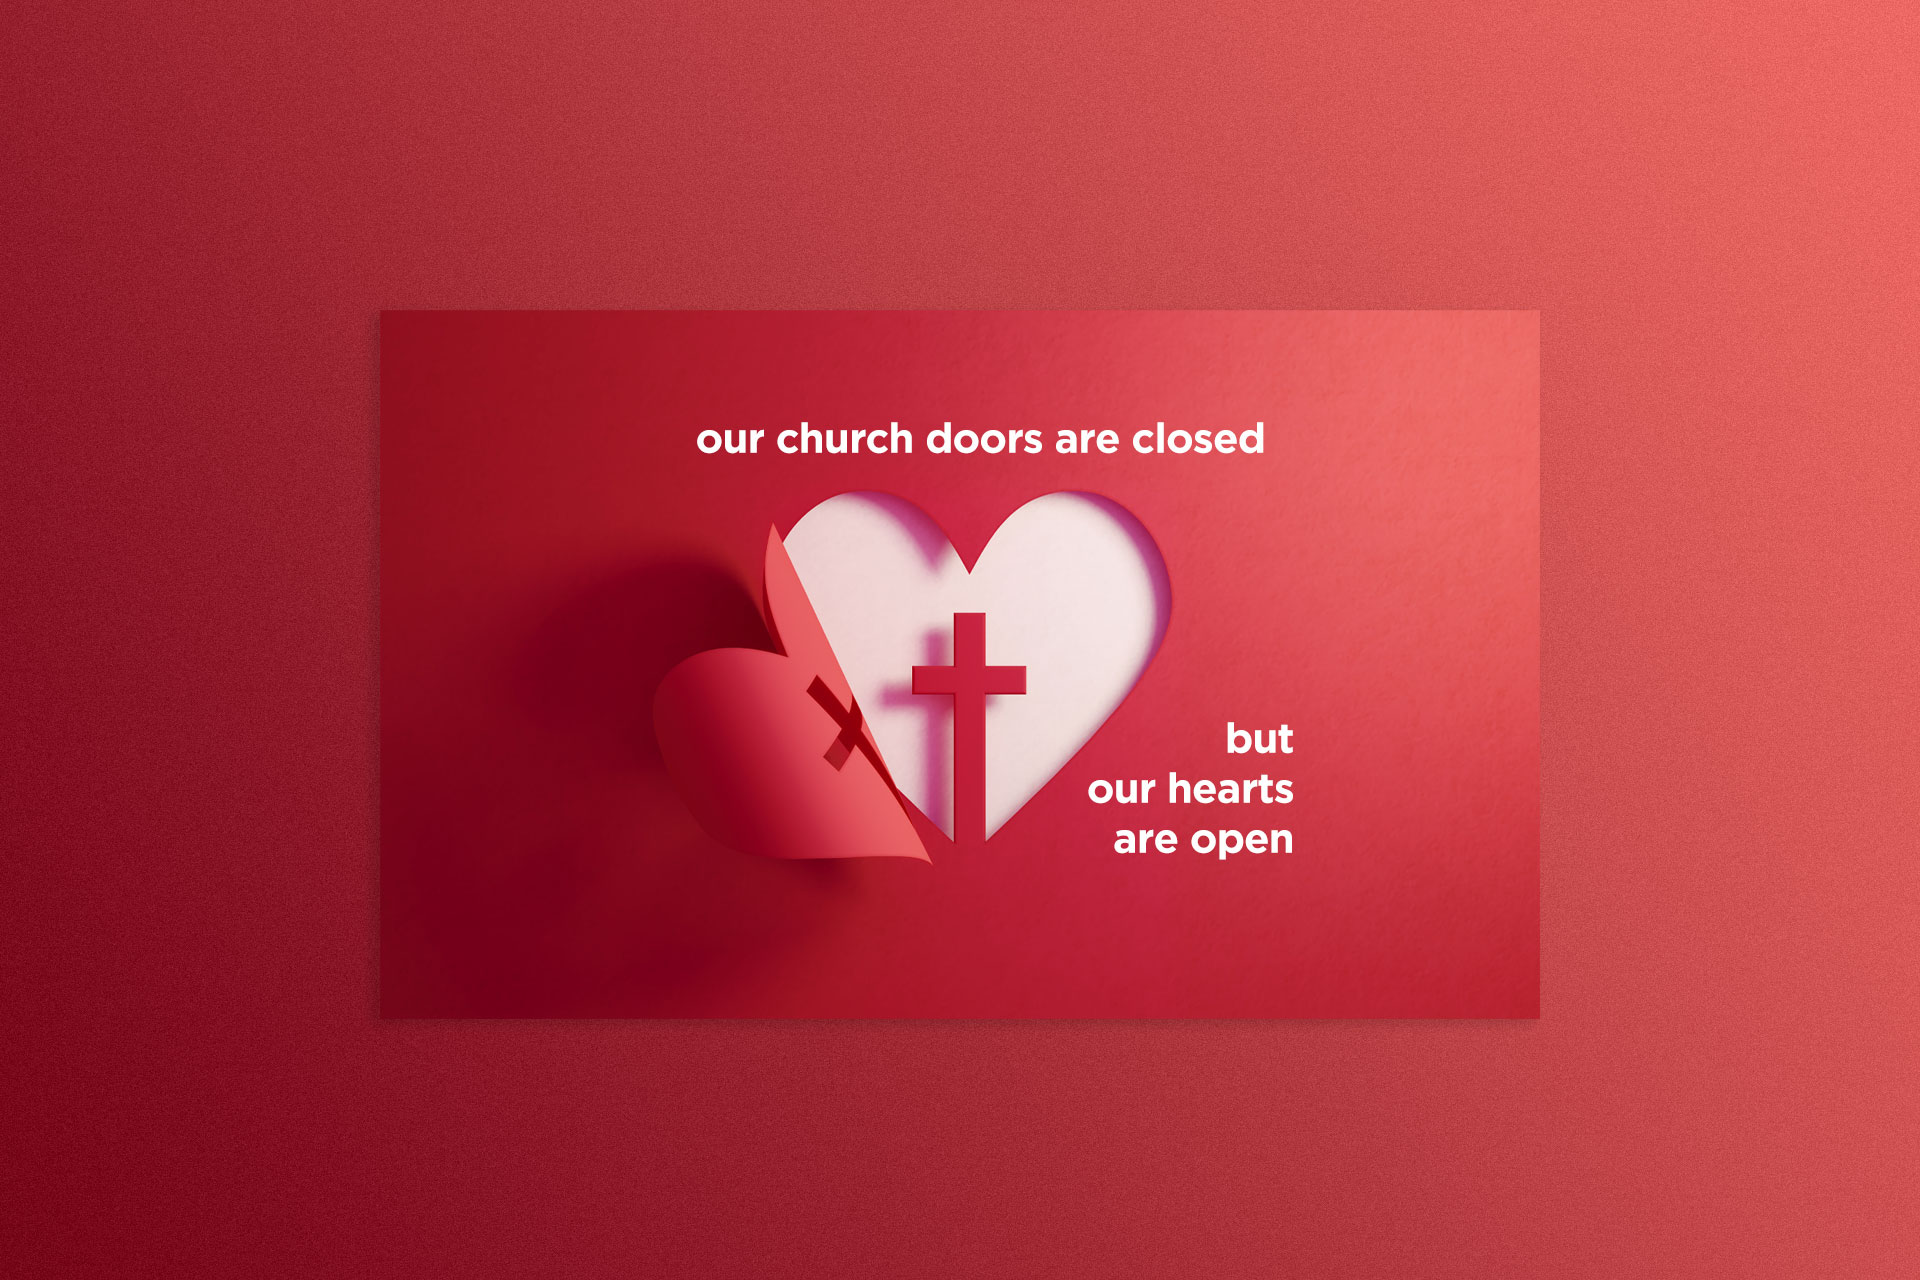 Our Doors are Closed yet Our Hearts are Open